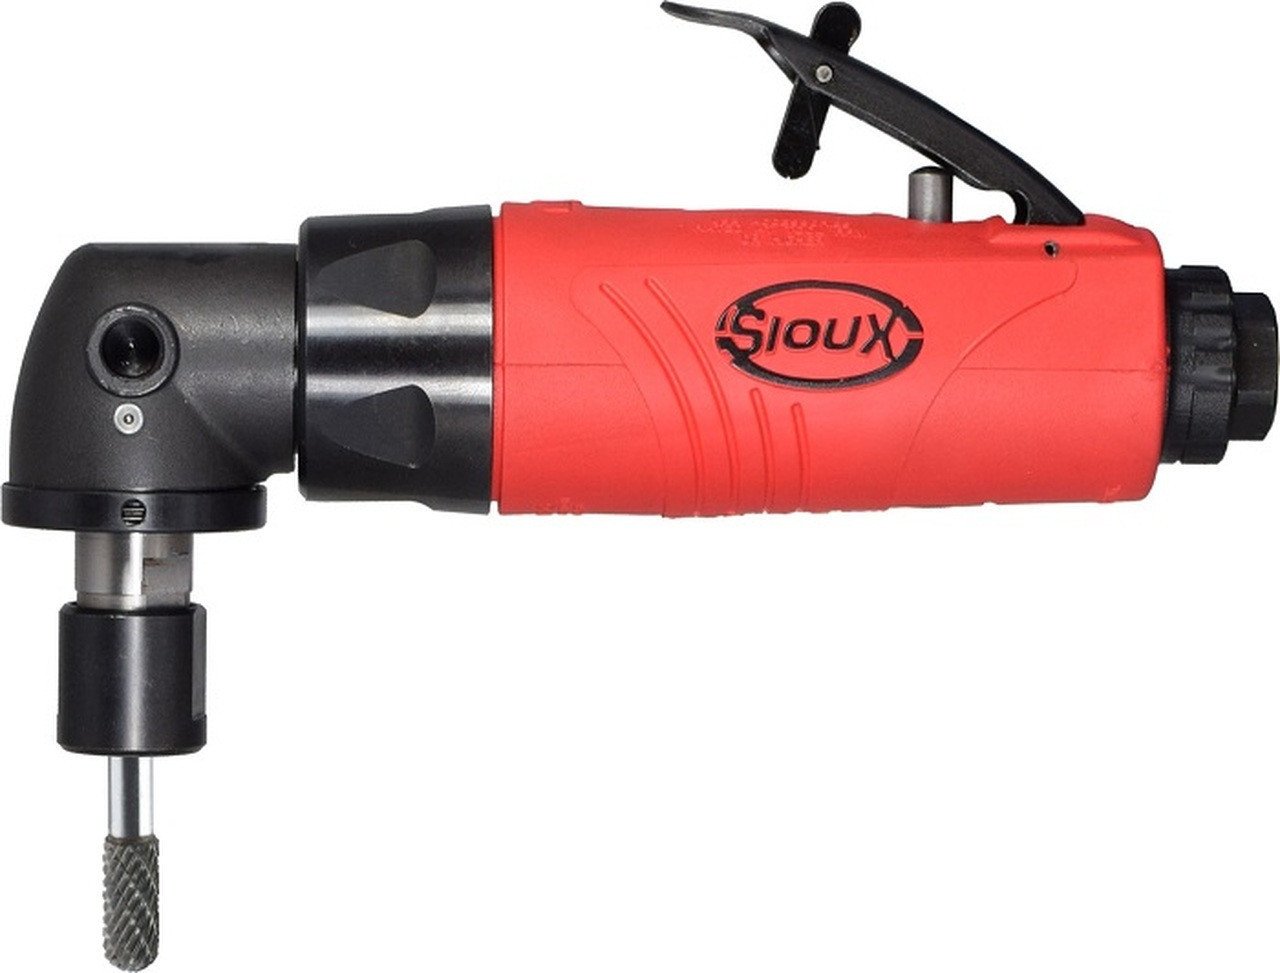 Sioux Tools SAG05S12S Right Angle Die Grinder | 0.5 HP | 12000 RPM | 300 Series Collet | Rear Exhaust